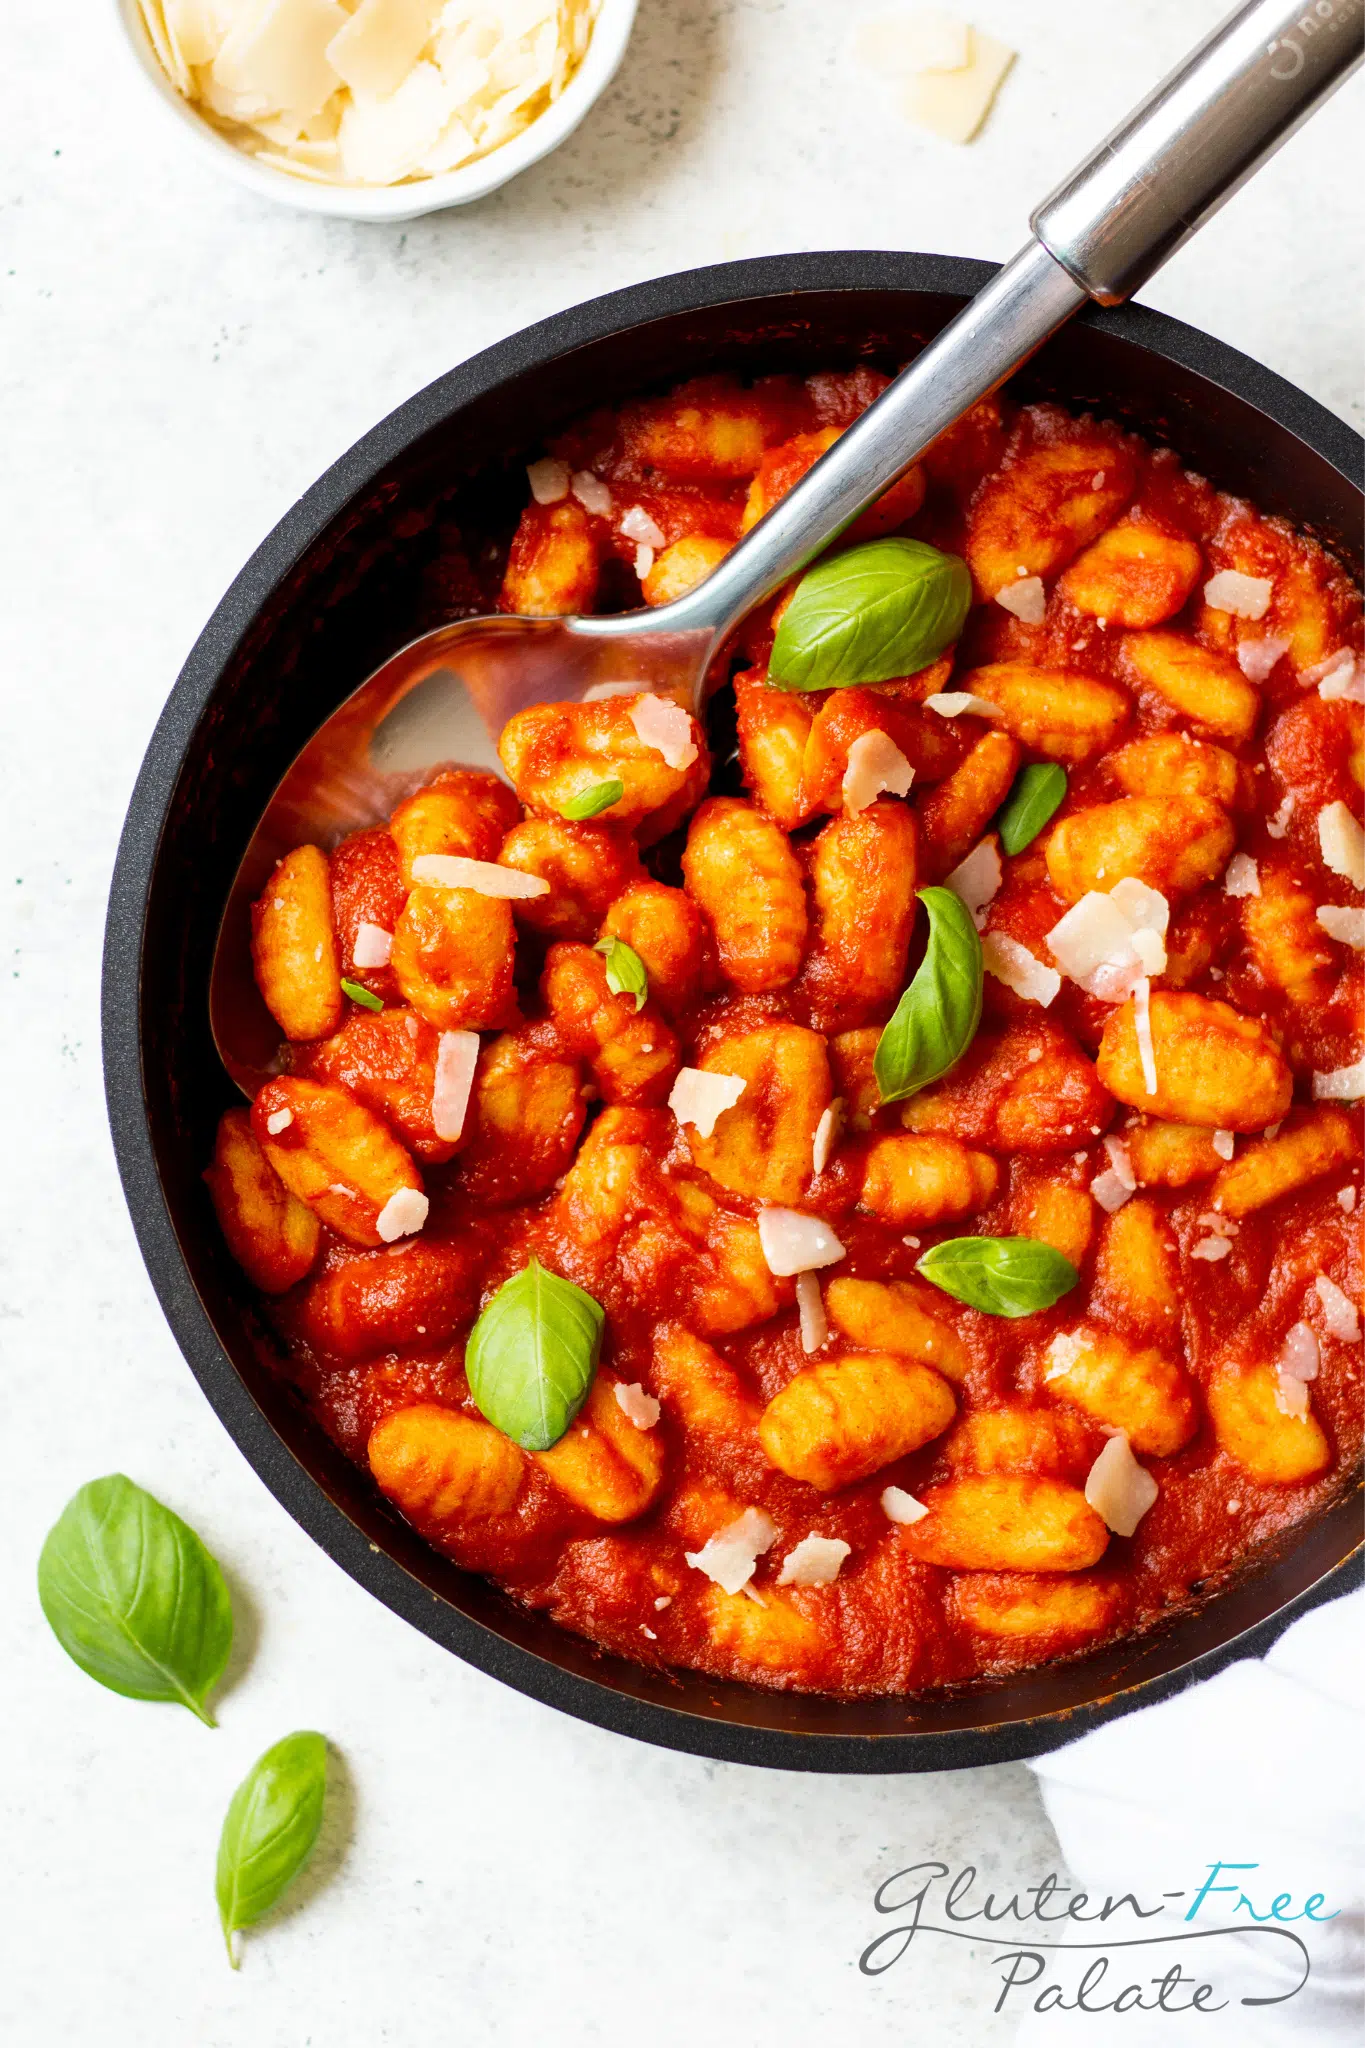 Gluten-free gnocchi in a pan of tomato sauce, garnished with basil and shaved cheese